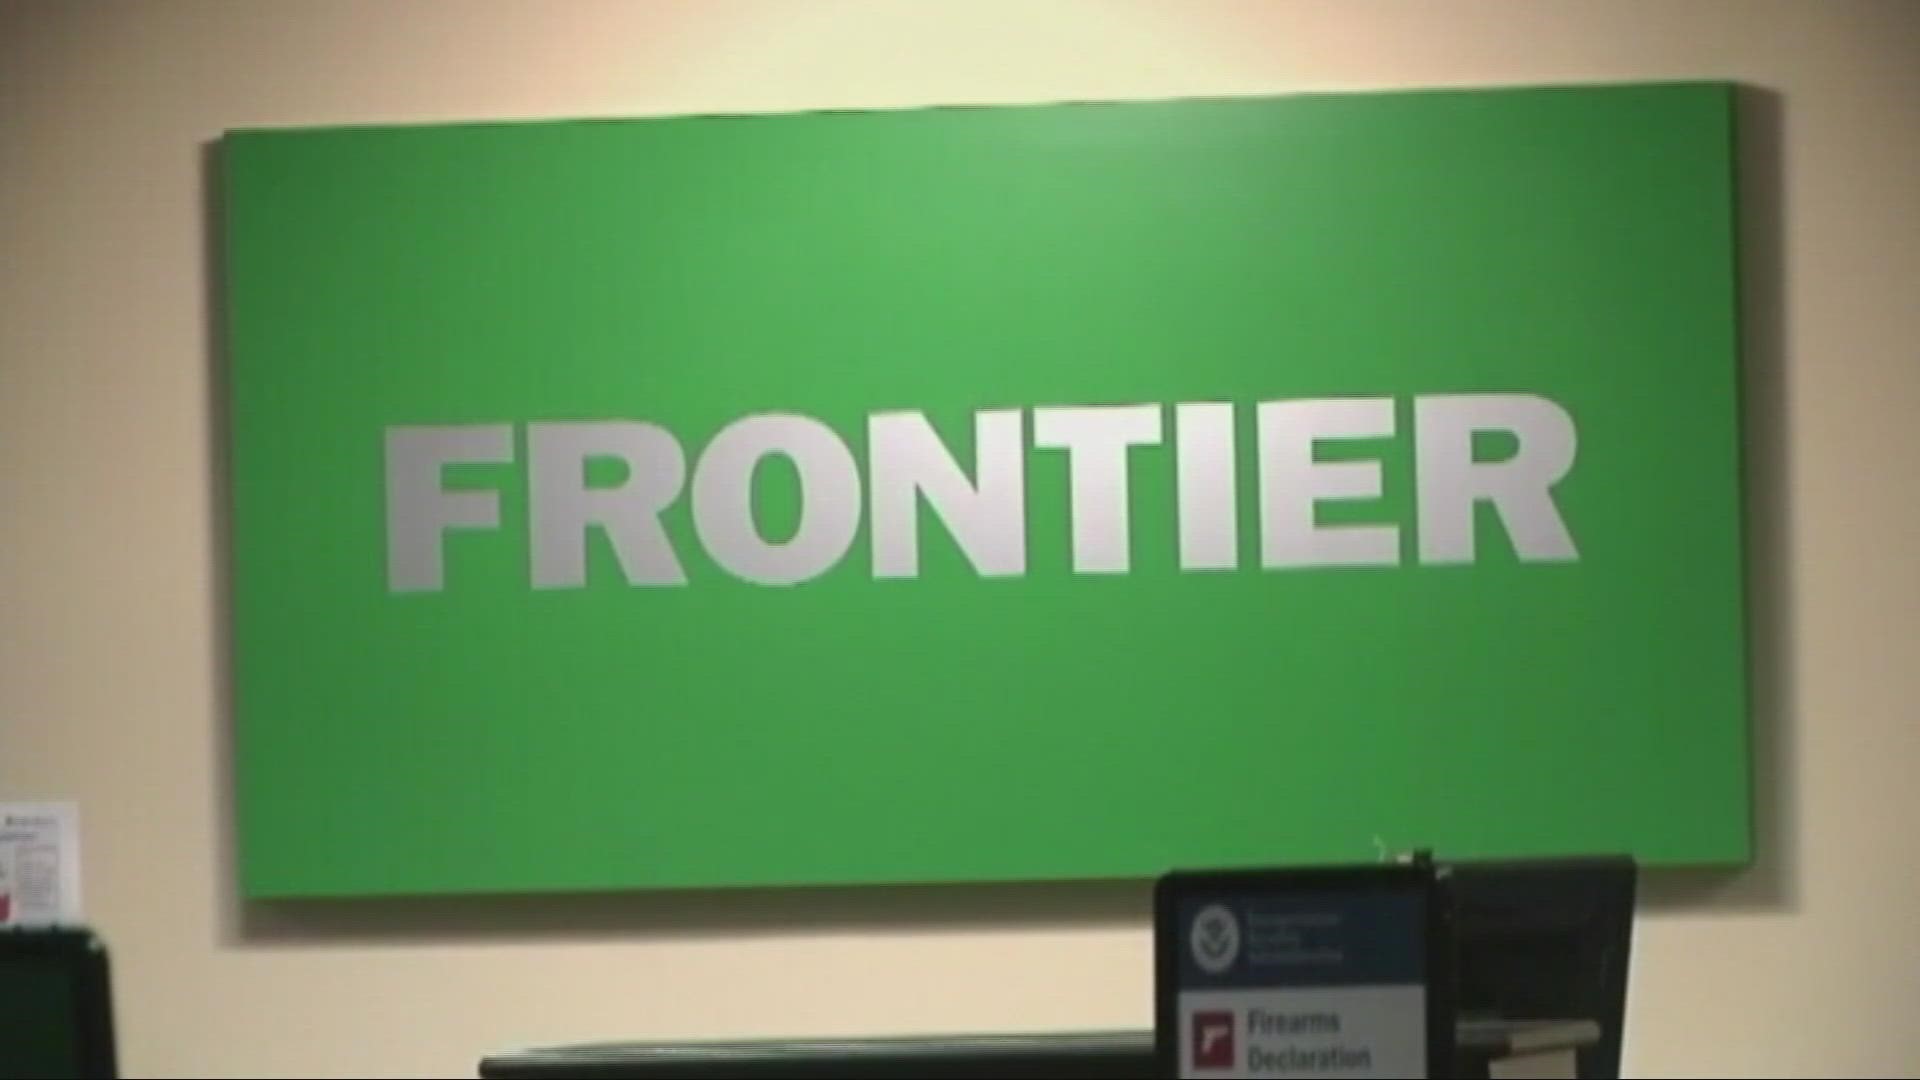 Frontier Airlines will begin offering fares as low as $69 to fly nonstop from Cleveland to Puerto Rico starting in May.